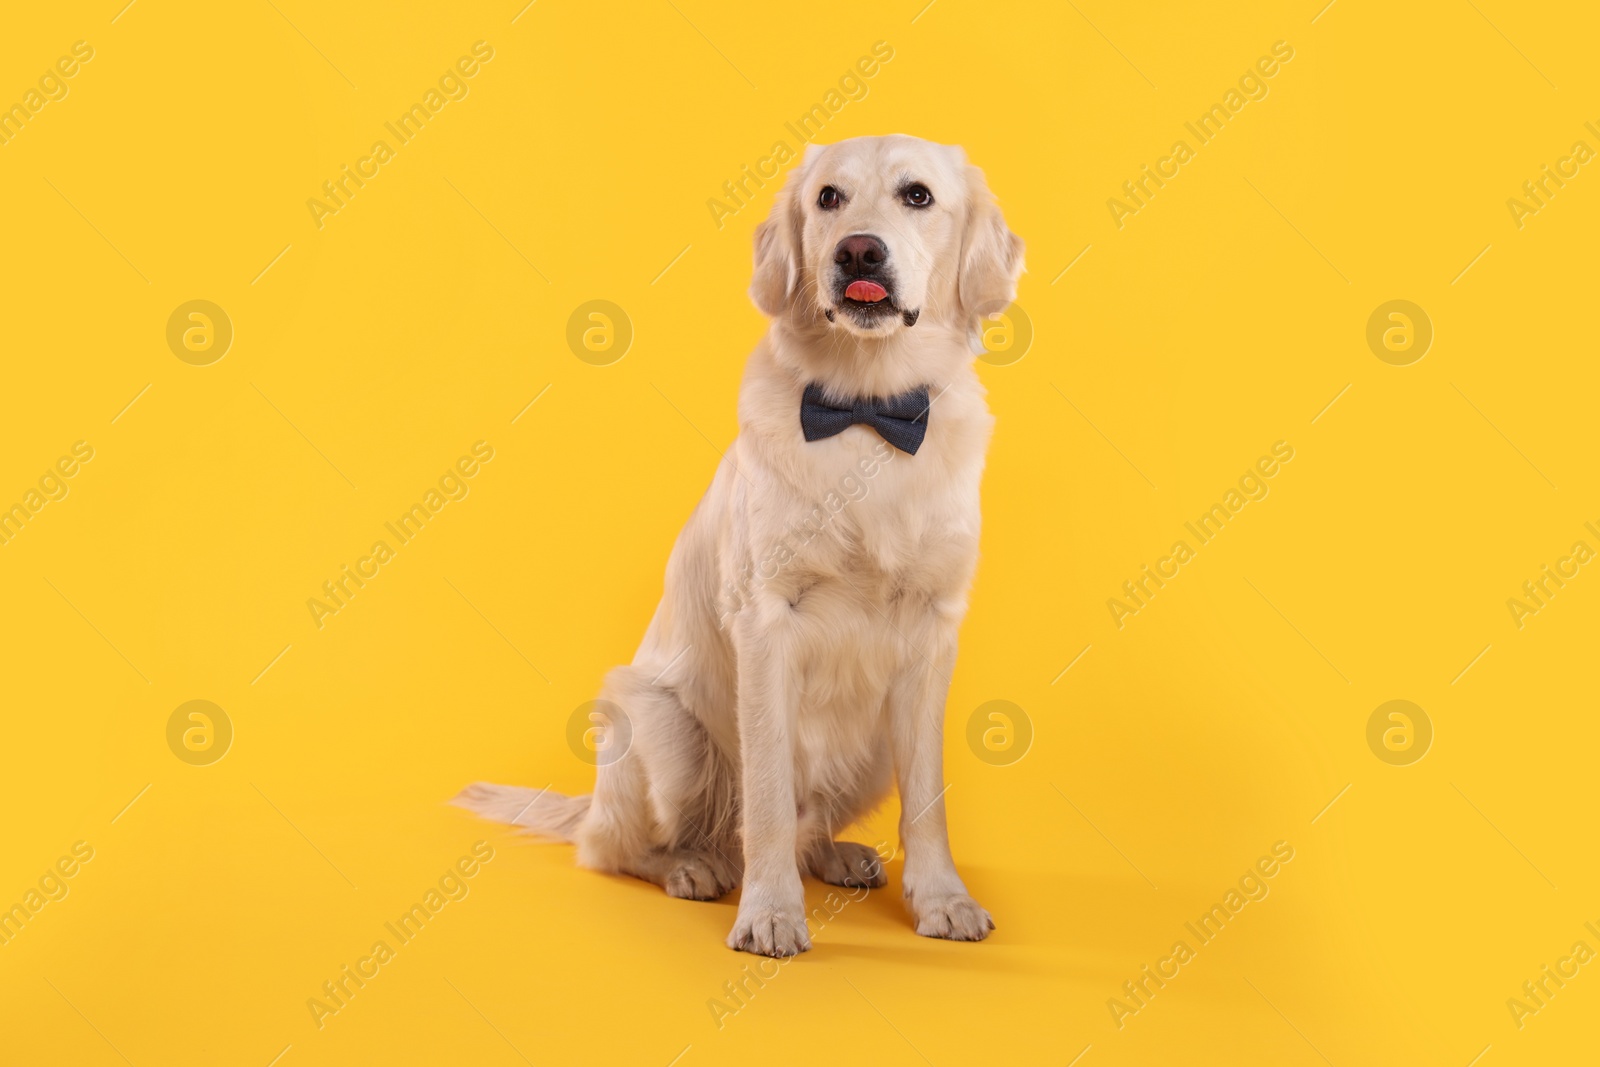 Photo of Cute Labrador Retriever with stylish bow tie on yellow background